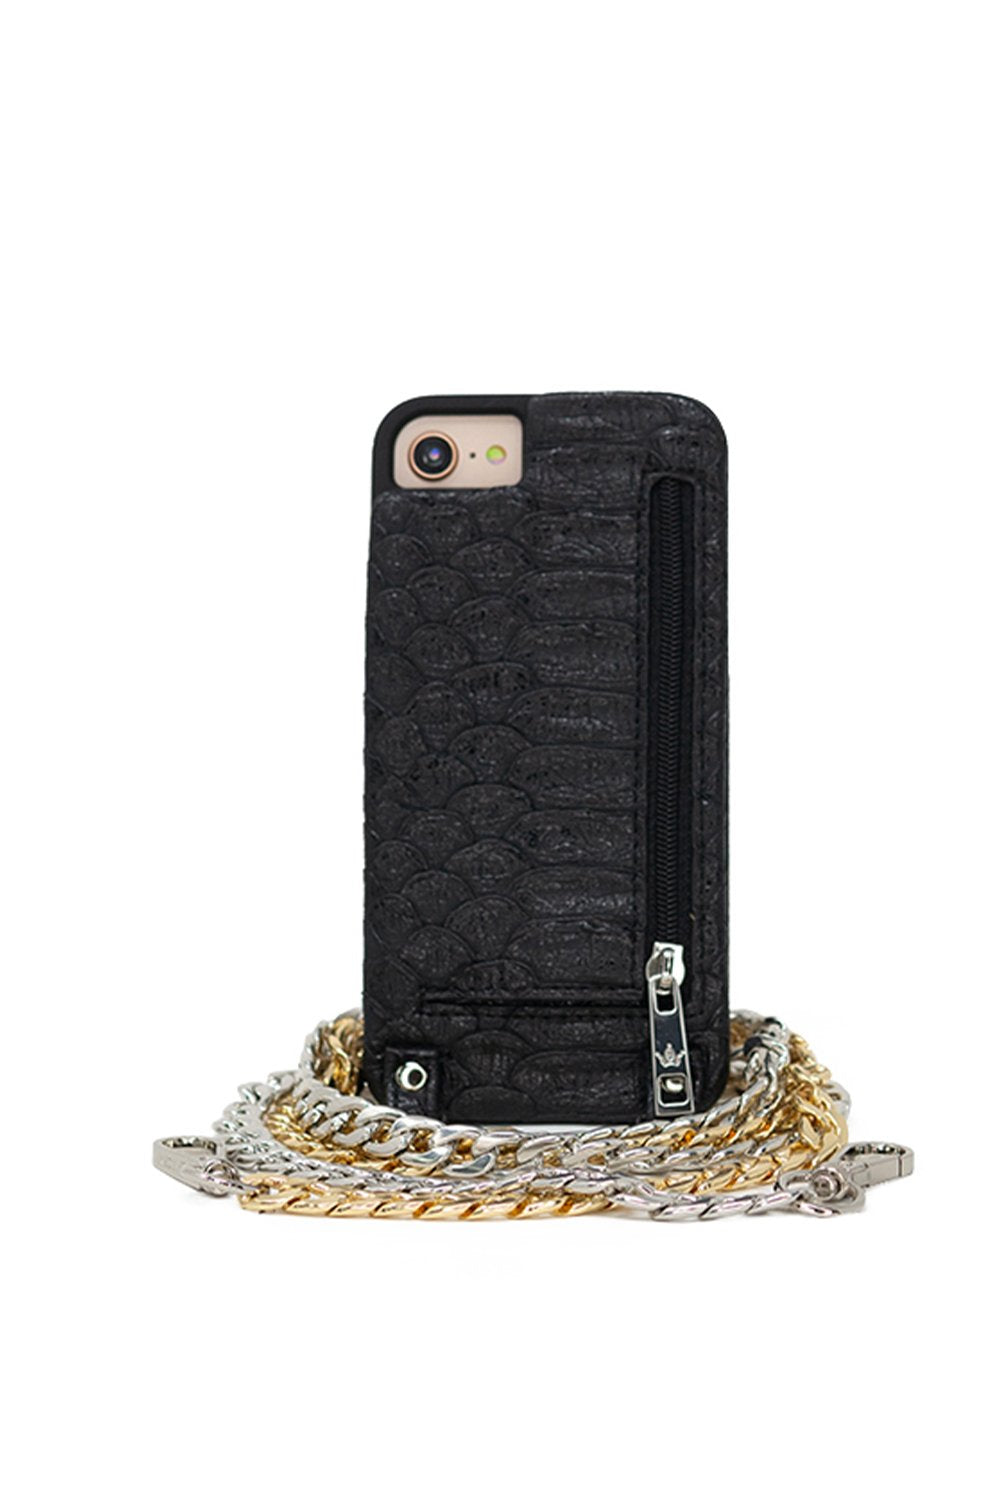 Crossbody Chain Strap Card Wallet Case Cover For iPhone 13 Pro Max 12 11 XS  7 8+